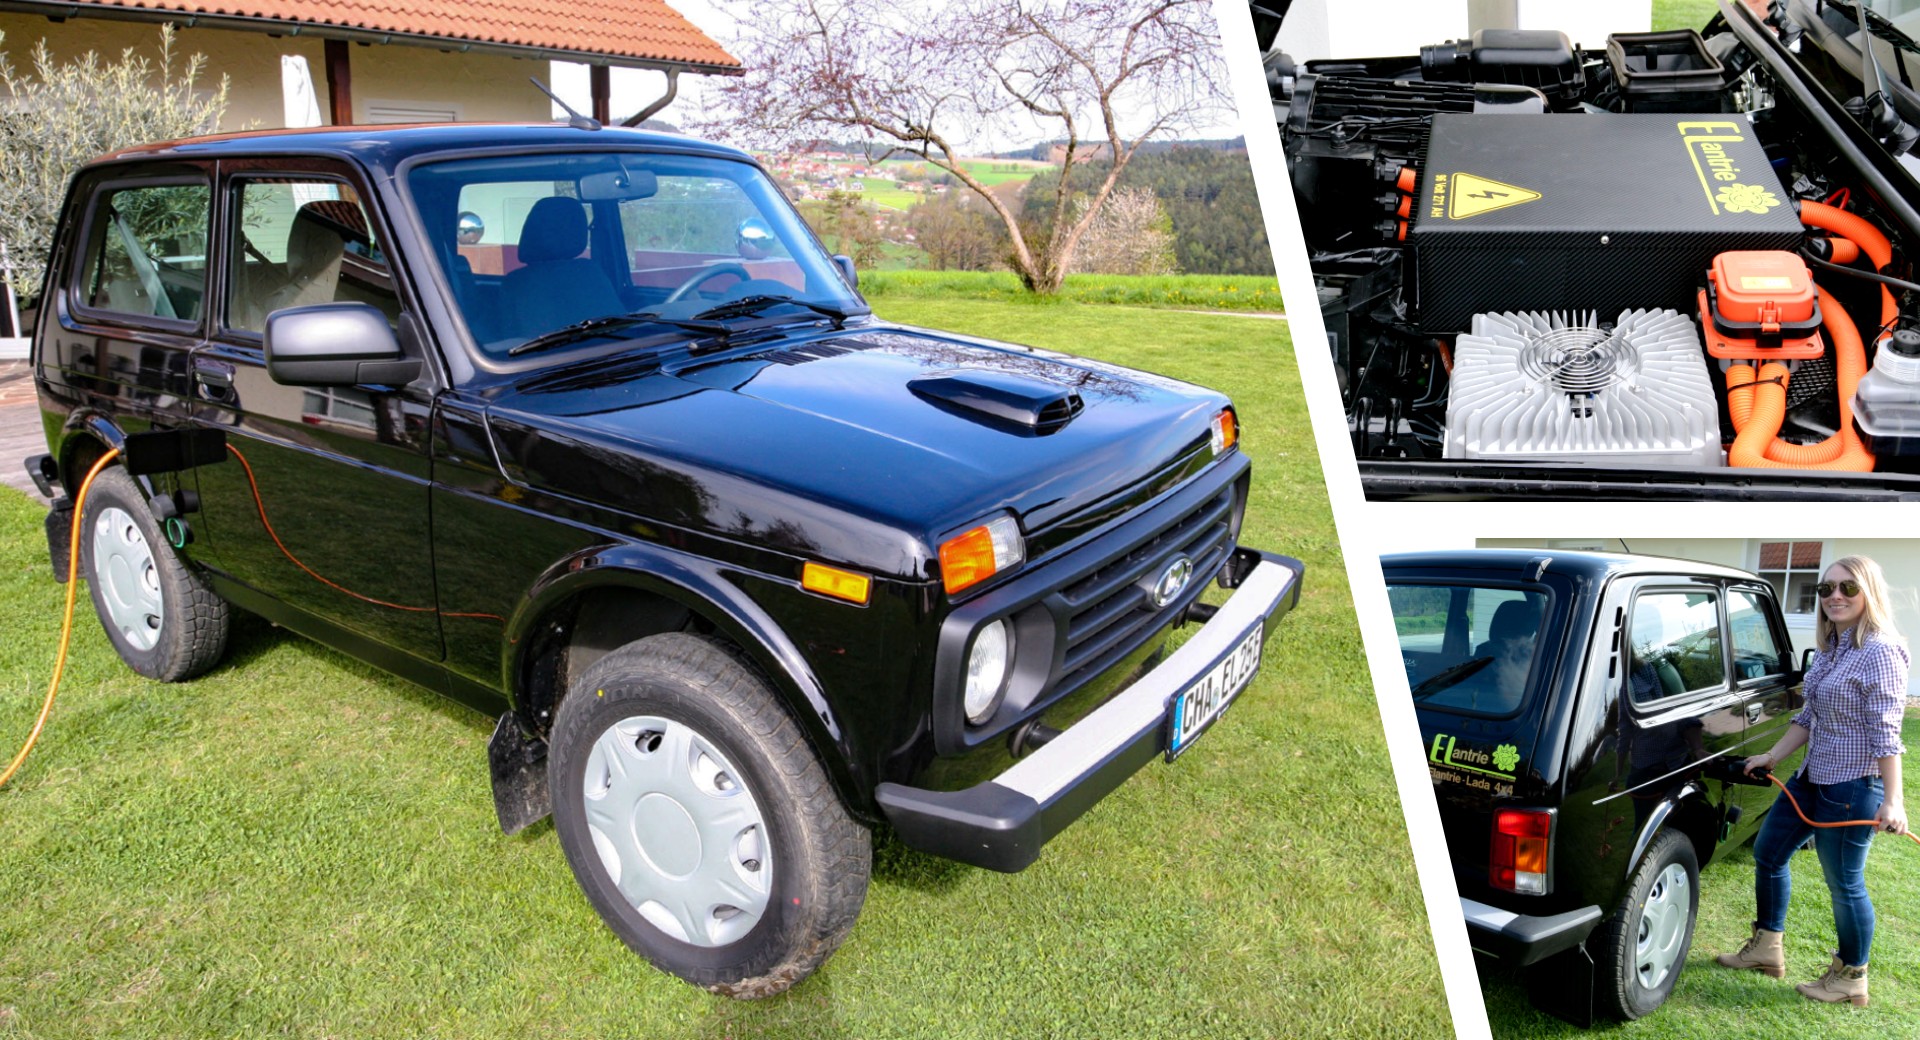 You Can Now Convert Your Lada Niva To Electric Power For Just